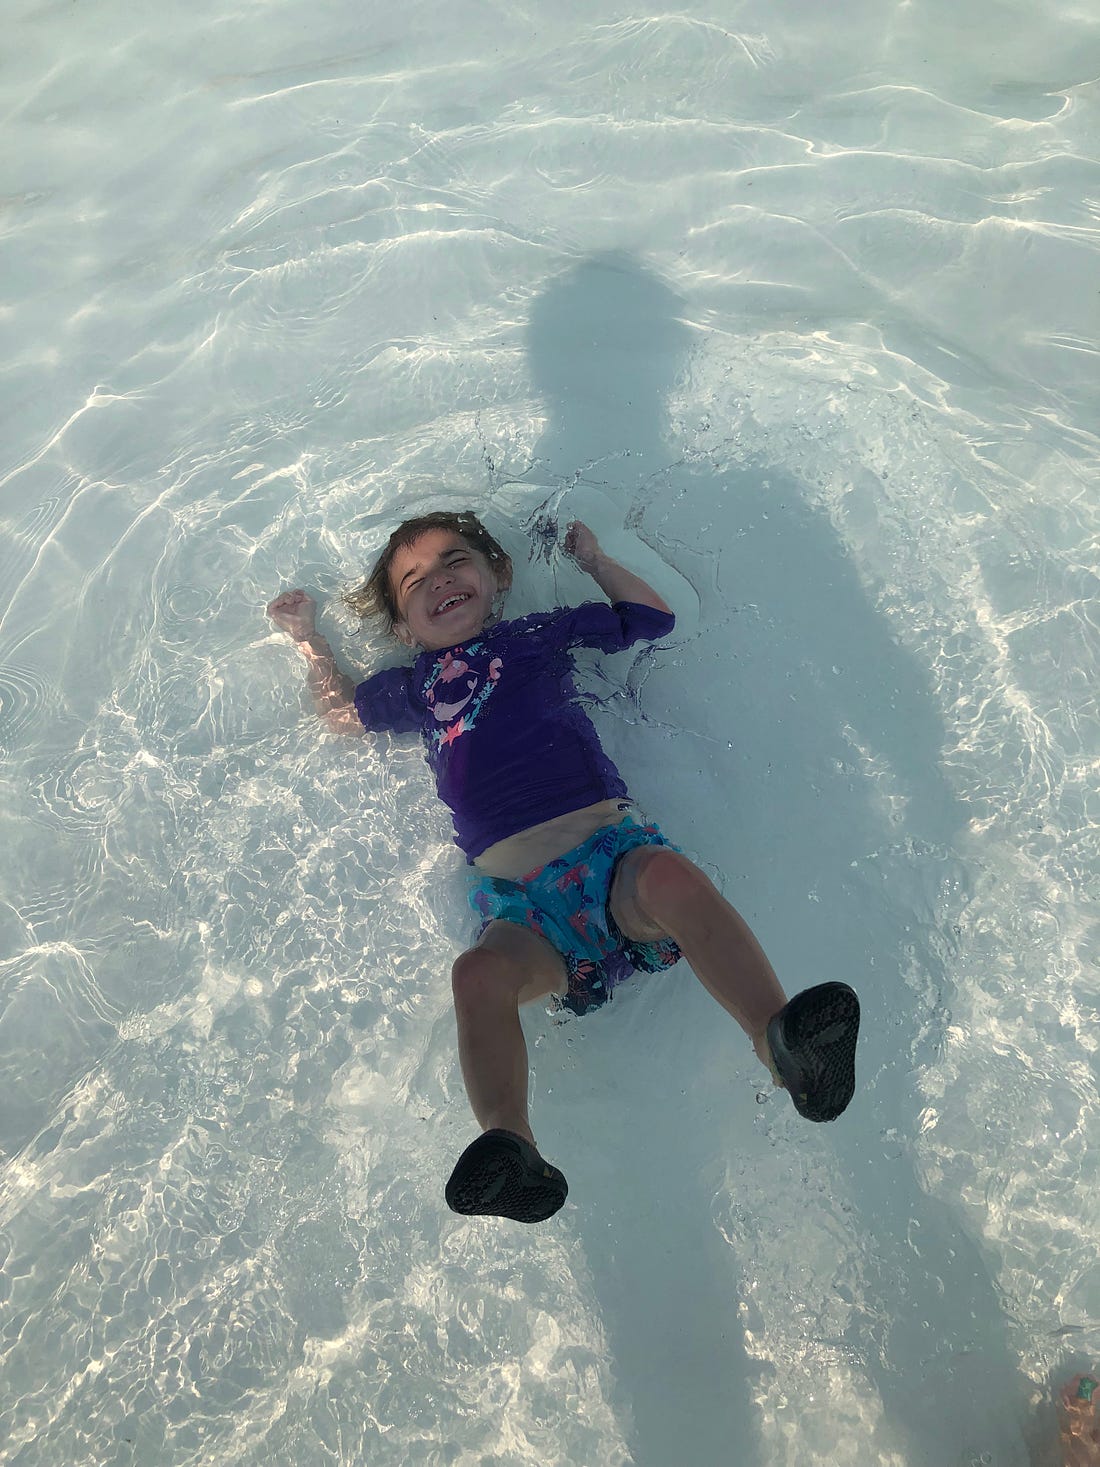 Photograph of a gleeful toddler in a wave pool